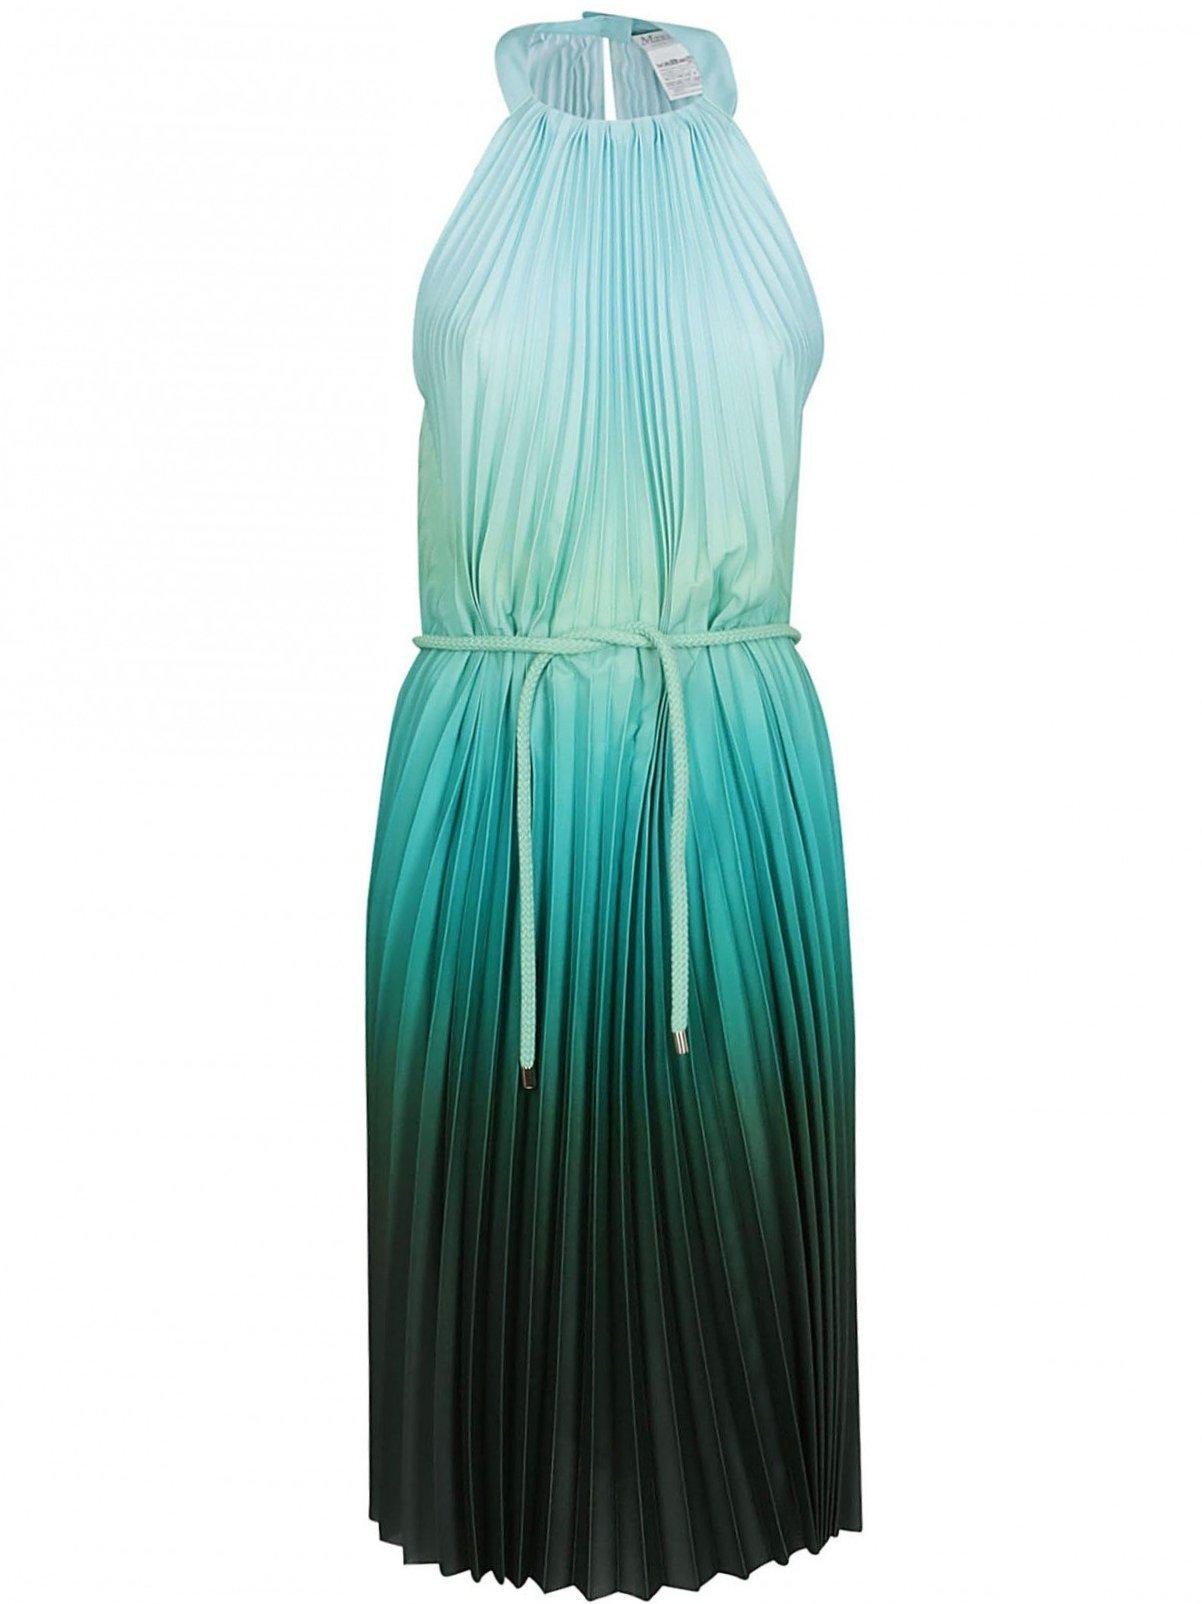 Max Mara Fuxia Pleated Dress in Turquoise (Green) | Lyst